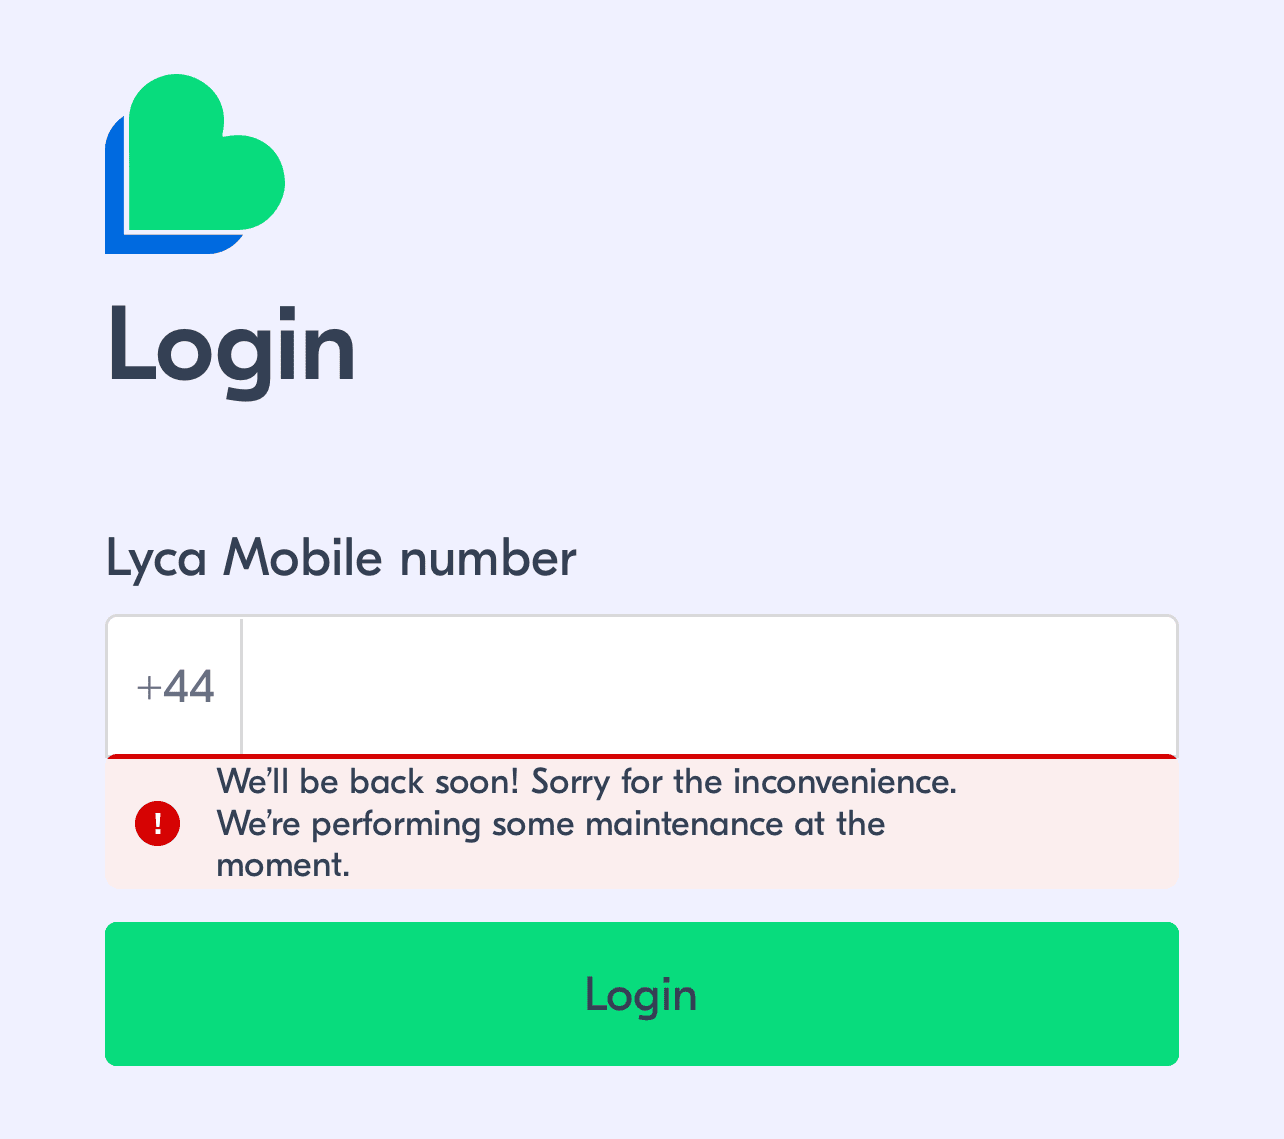 LycaMobile App down